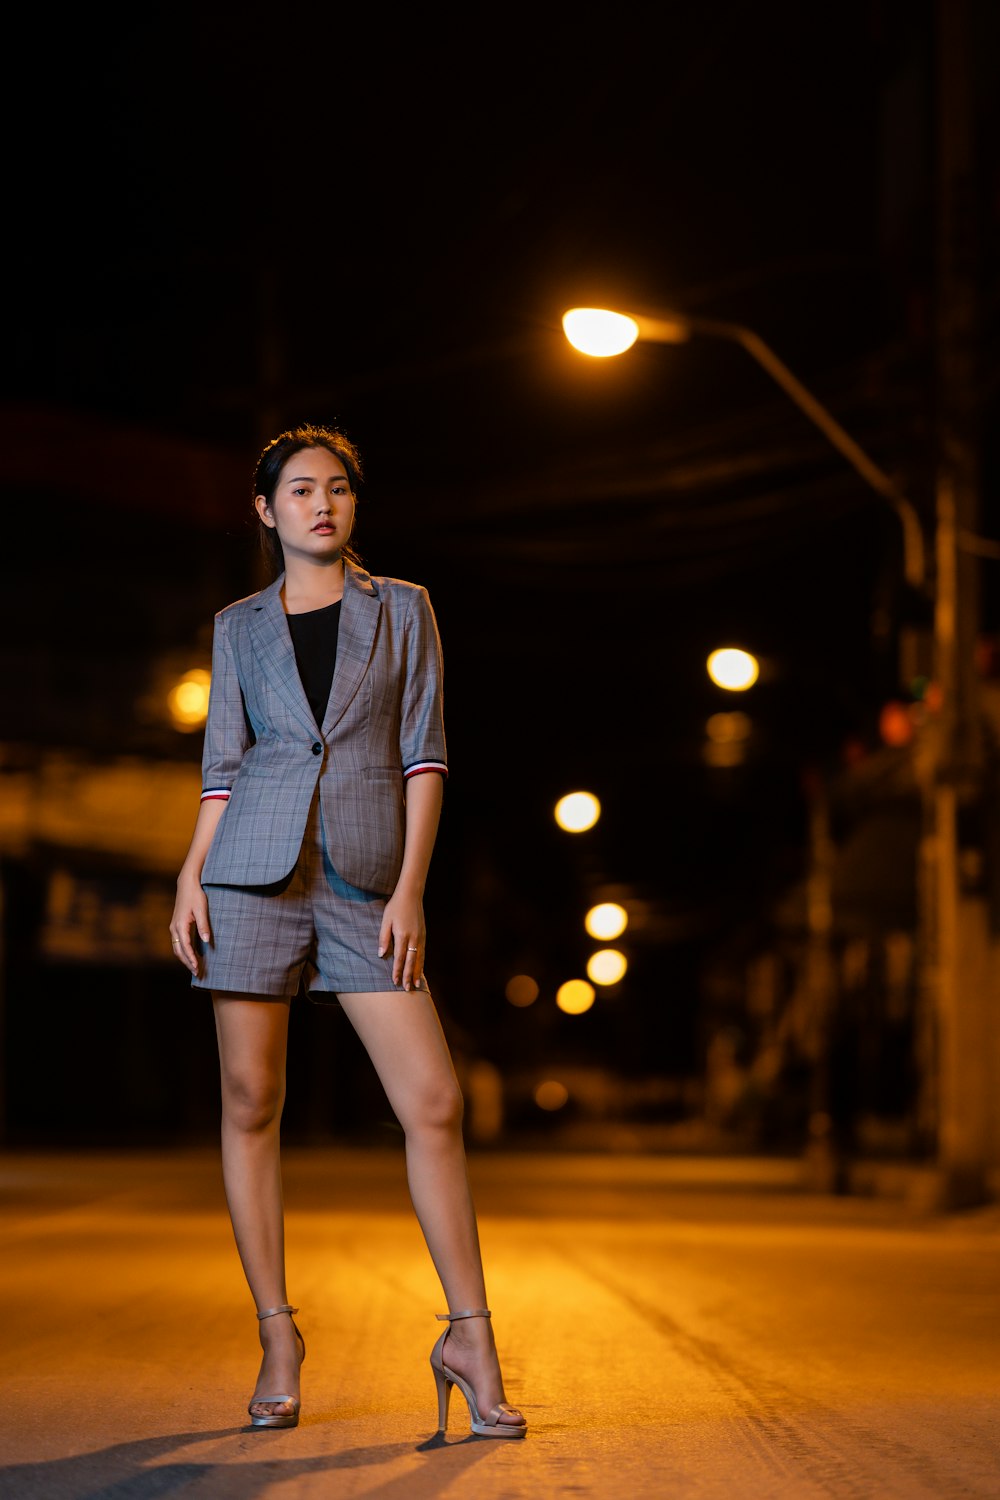 woman in in gray suit standing on street during nighttime